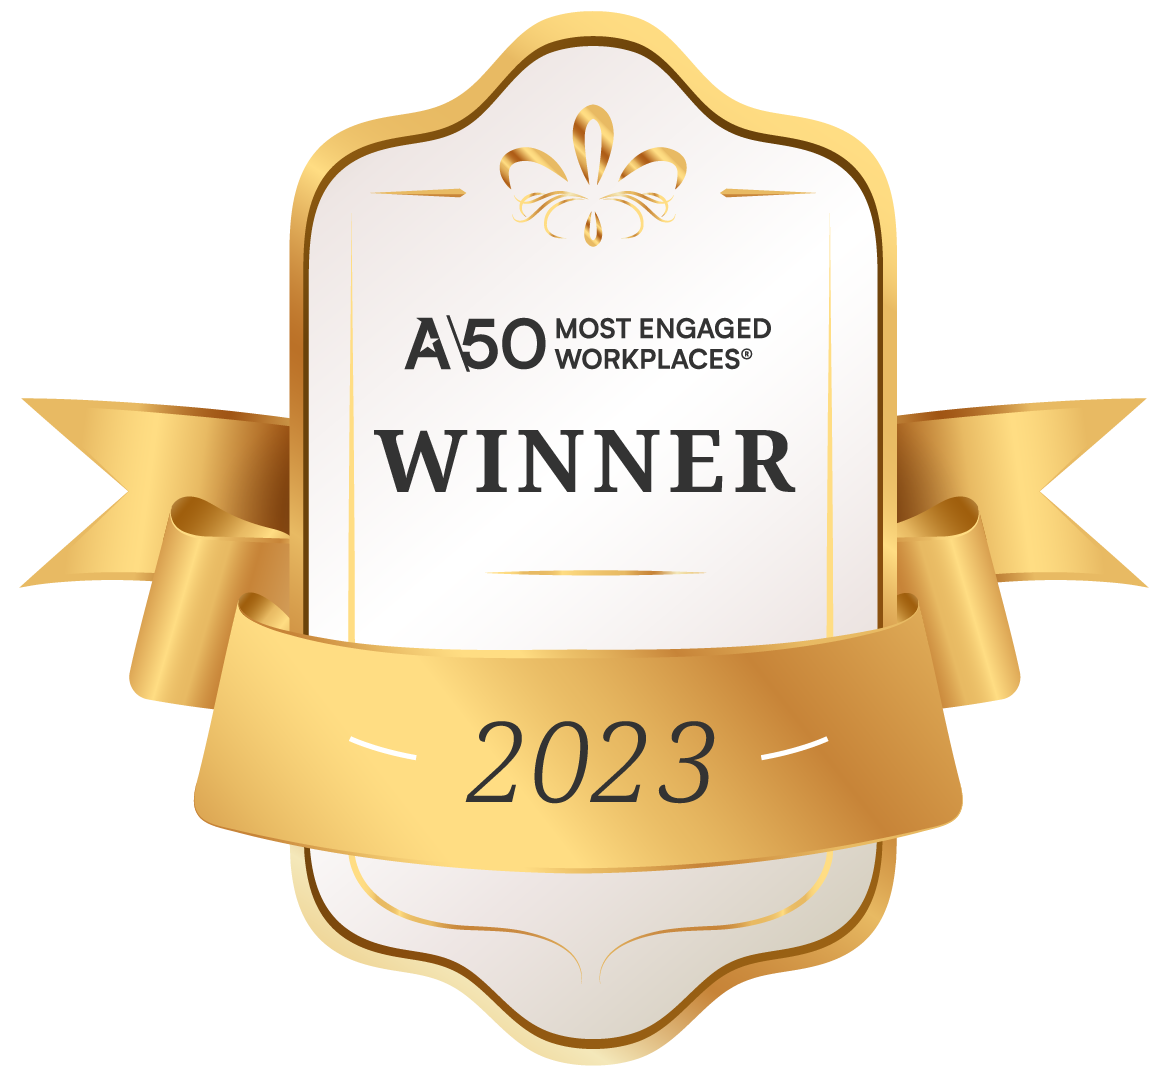 A/50 Most Engaged Workplaces Winner 2023 badge